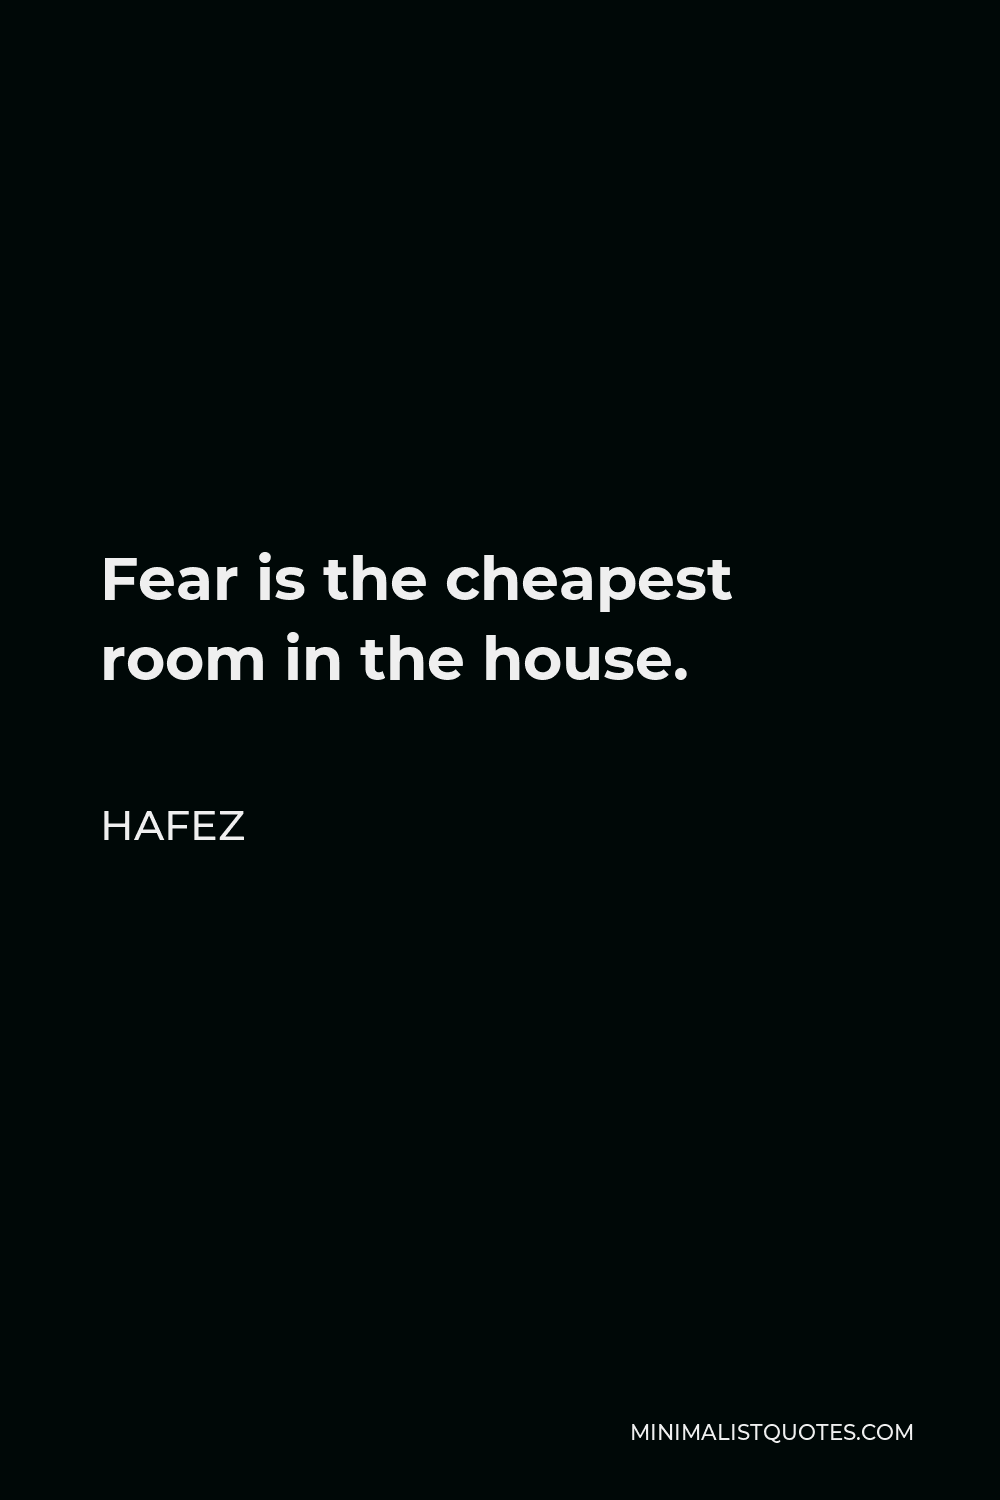 Hafez Quote - Fear is the cheapest room in the house.